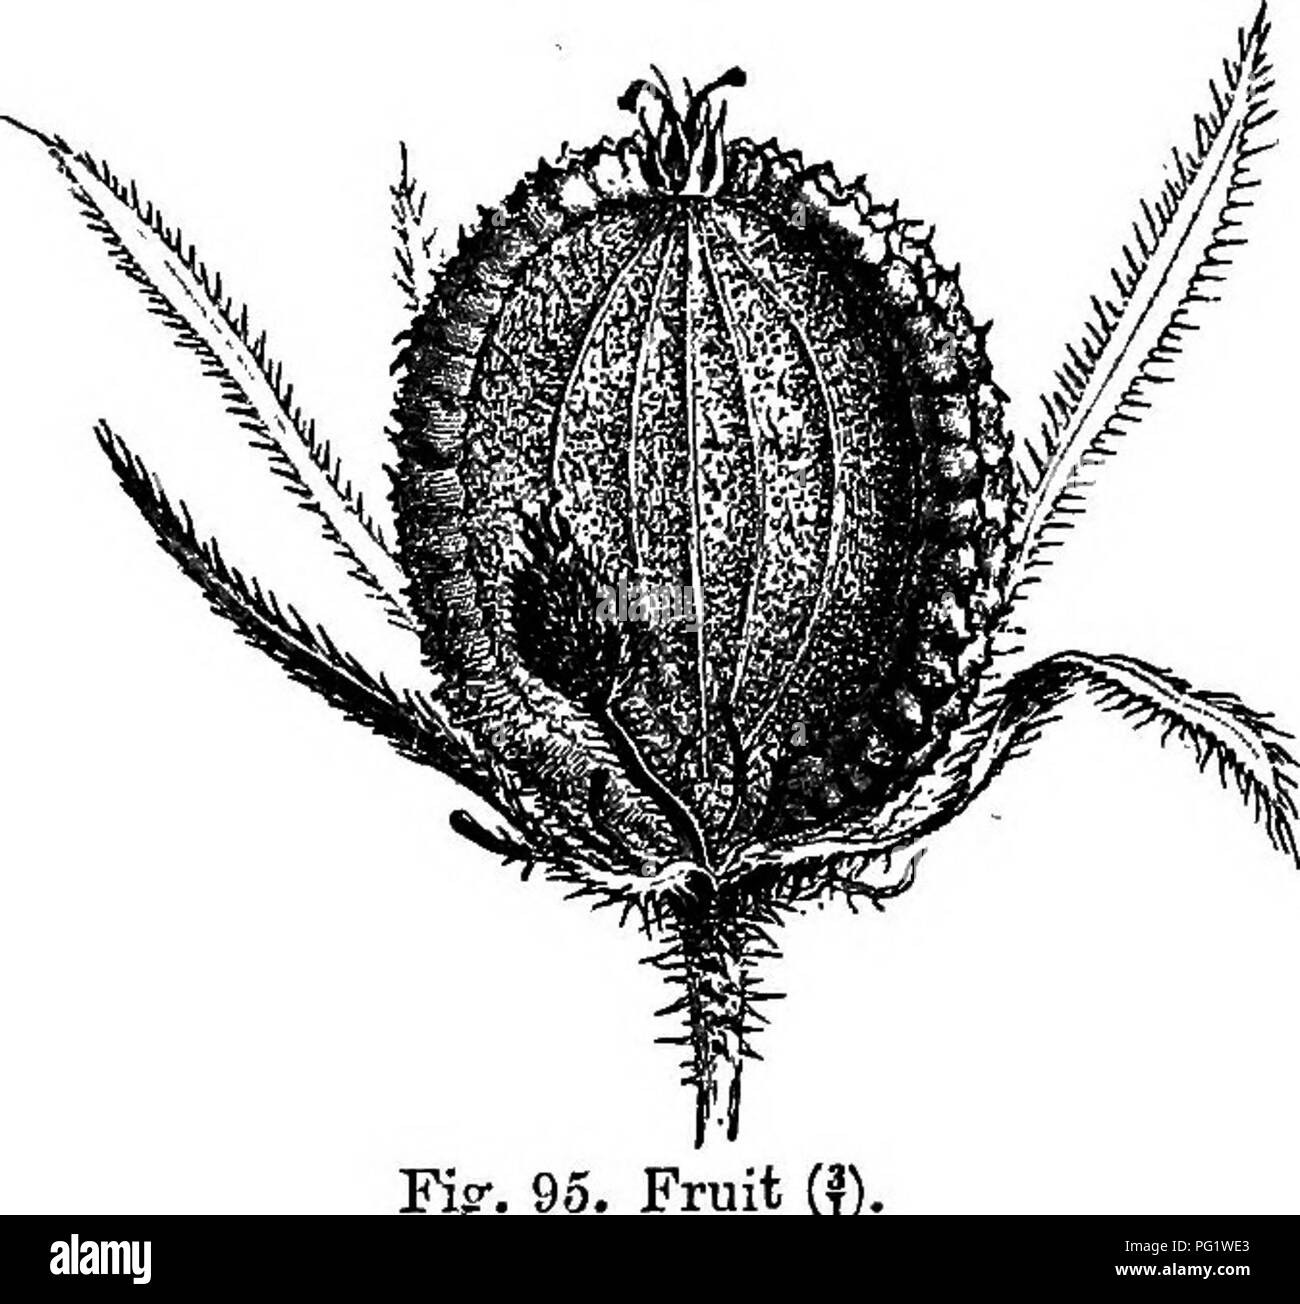 . The natural history of plants. Botany. UMBELLIFEBJS. 103 hjrium, from the Cape, has the same hollow with an indistinct intra- marginal circle. Opopanax orientalis has been rightly united to Maldbaila; but, by the intermediation of 0. persicum, it is inseparable from 0. chironium, differing only by its numerous vittse, and from Stenotcmia, which has also two or three vittse in each furrow, and is otherwise very near Pastinaca and Heradeum} Johrenia is scarcely more distinct from the Peueedans. The fruit is not so thin, and the sube- rose margm itself is thicker; ^ * its general form is more e Stock Photo